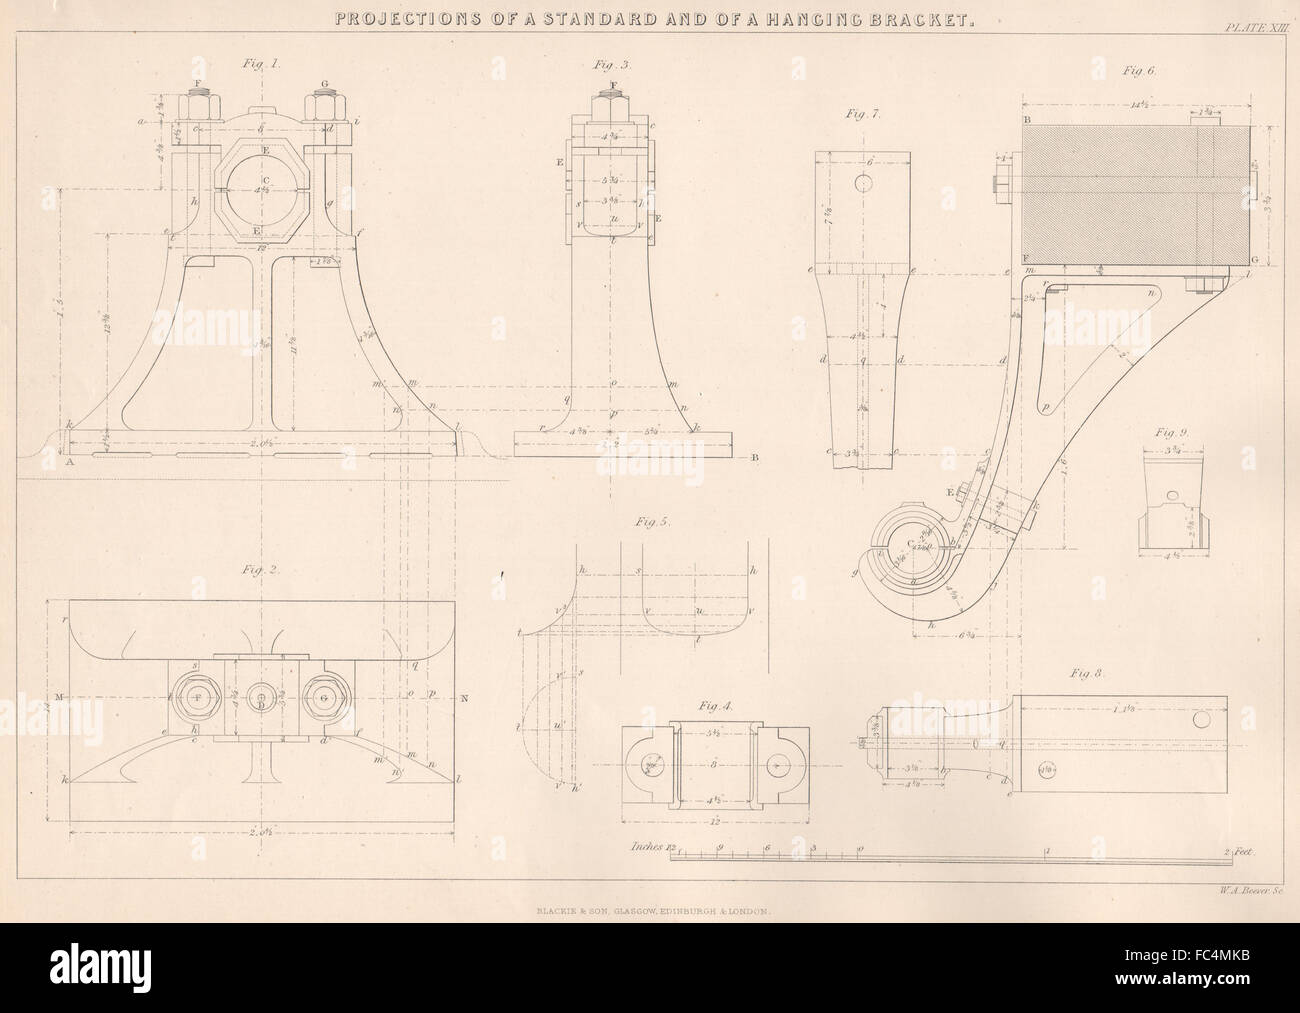 VICTORIAN ENGINEERING DRAWING. Standard & hanging bracket projections, 1876 Stock Photo